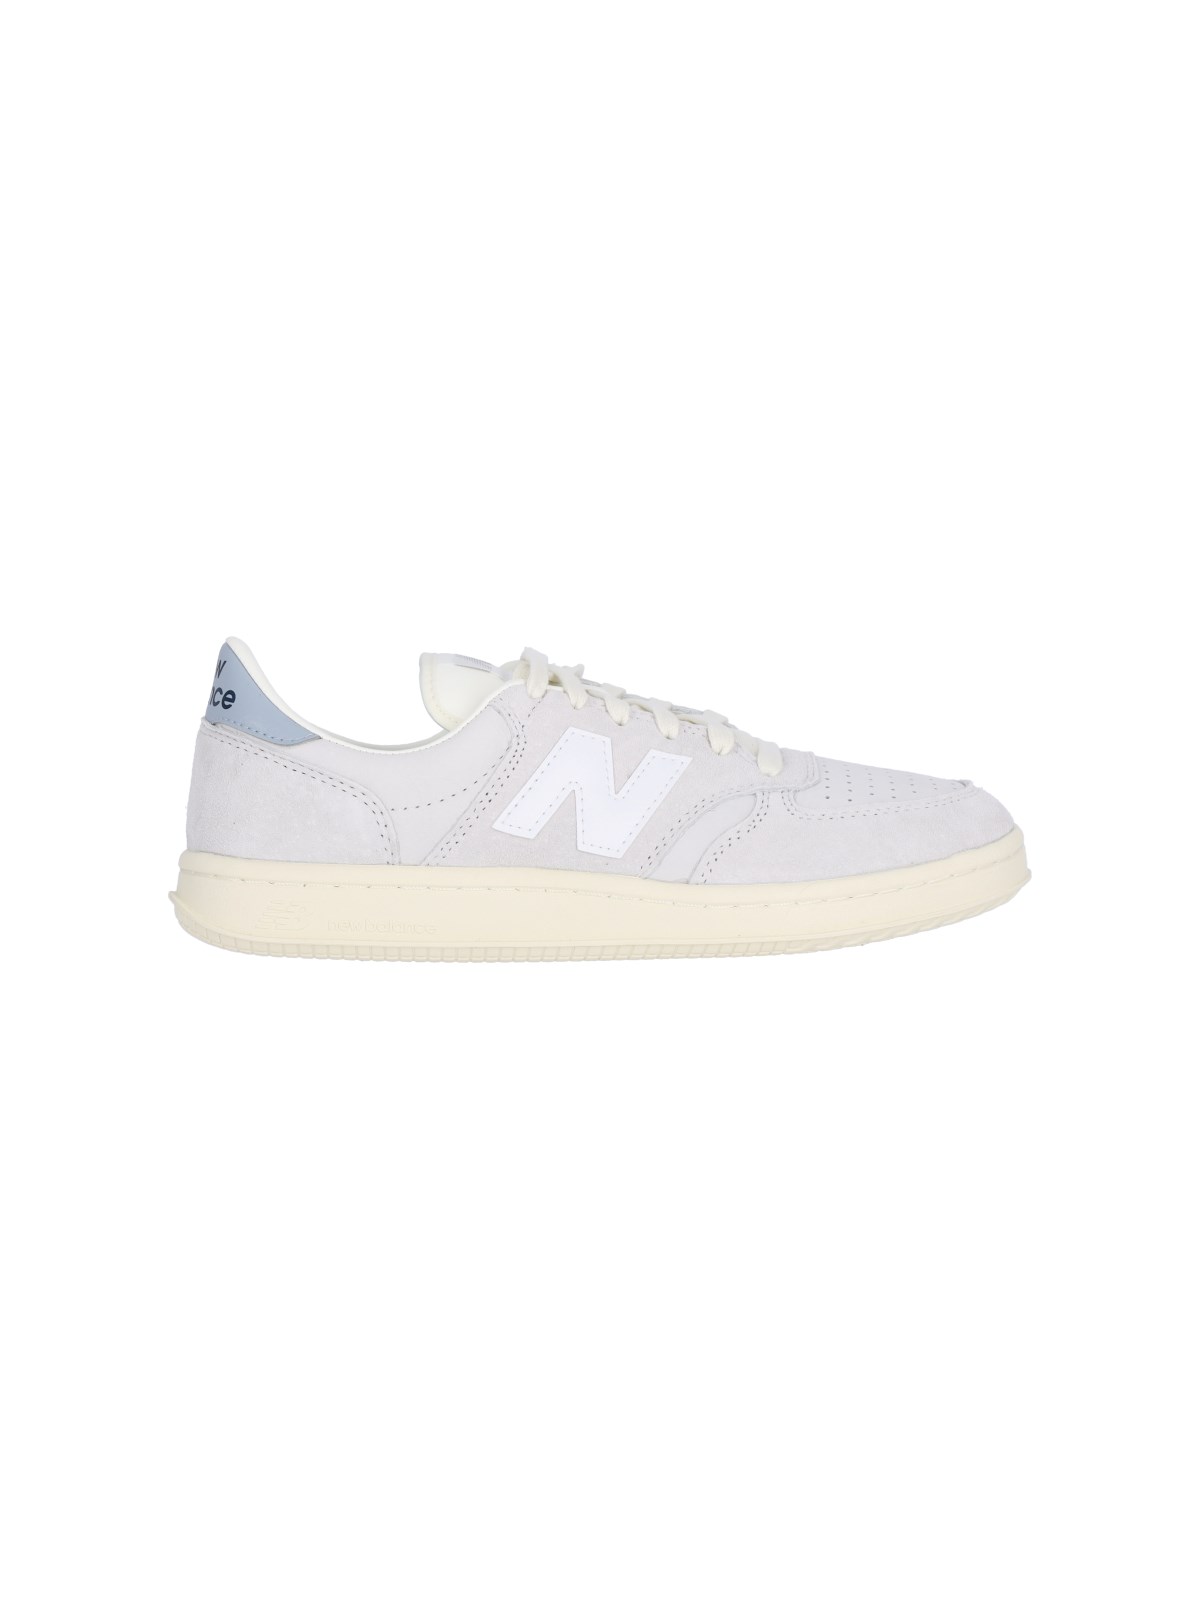 New Balance "t500" Sneakers In White